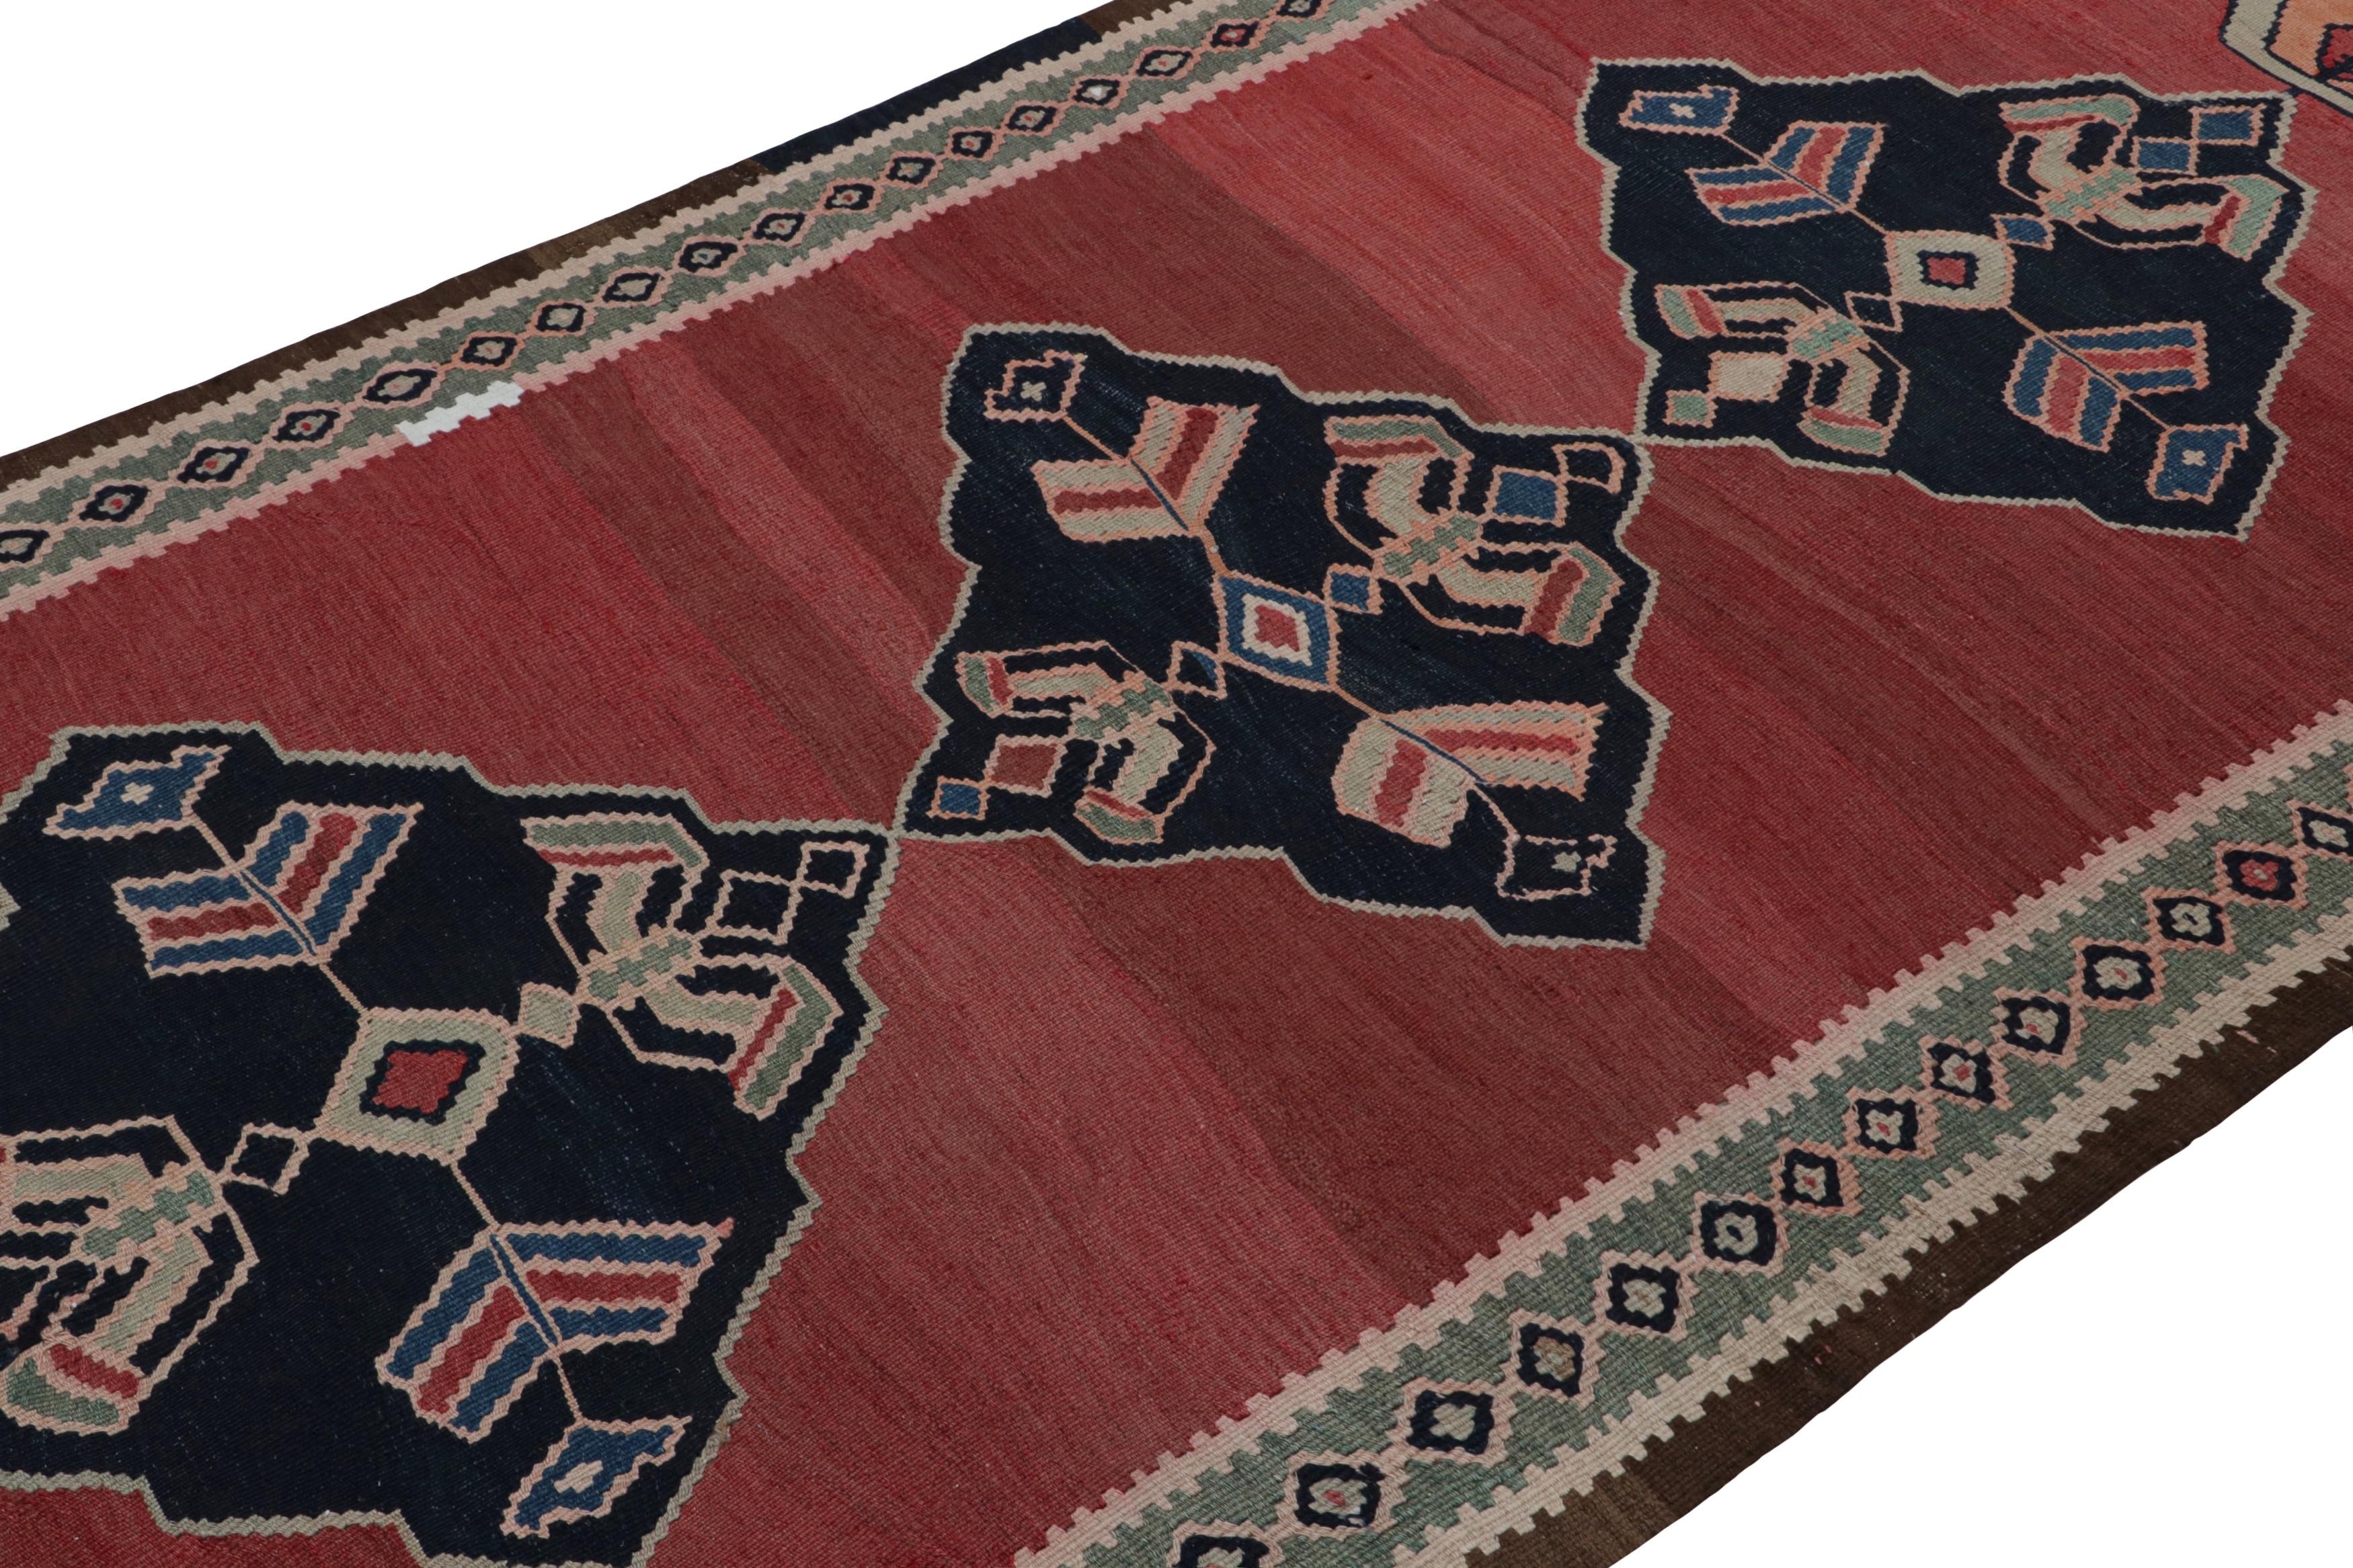 Hand-Woven Vintage Afghani tribal Kilim rug with Open Field and Medallions from Rug & Kilim For Sale